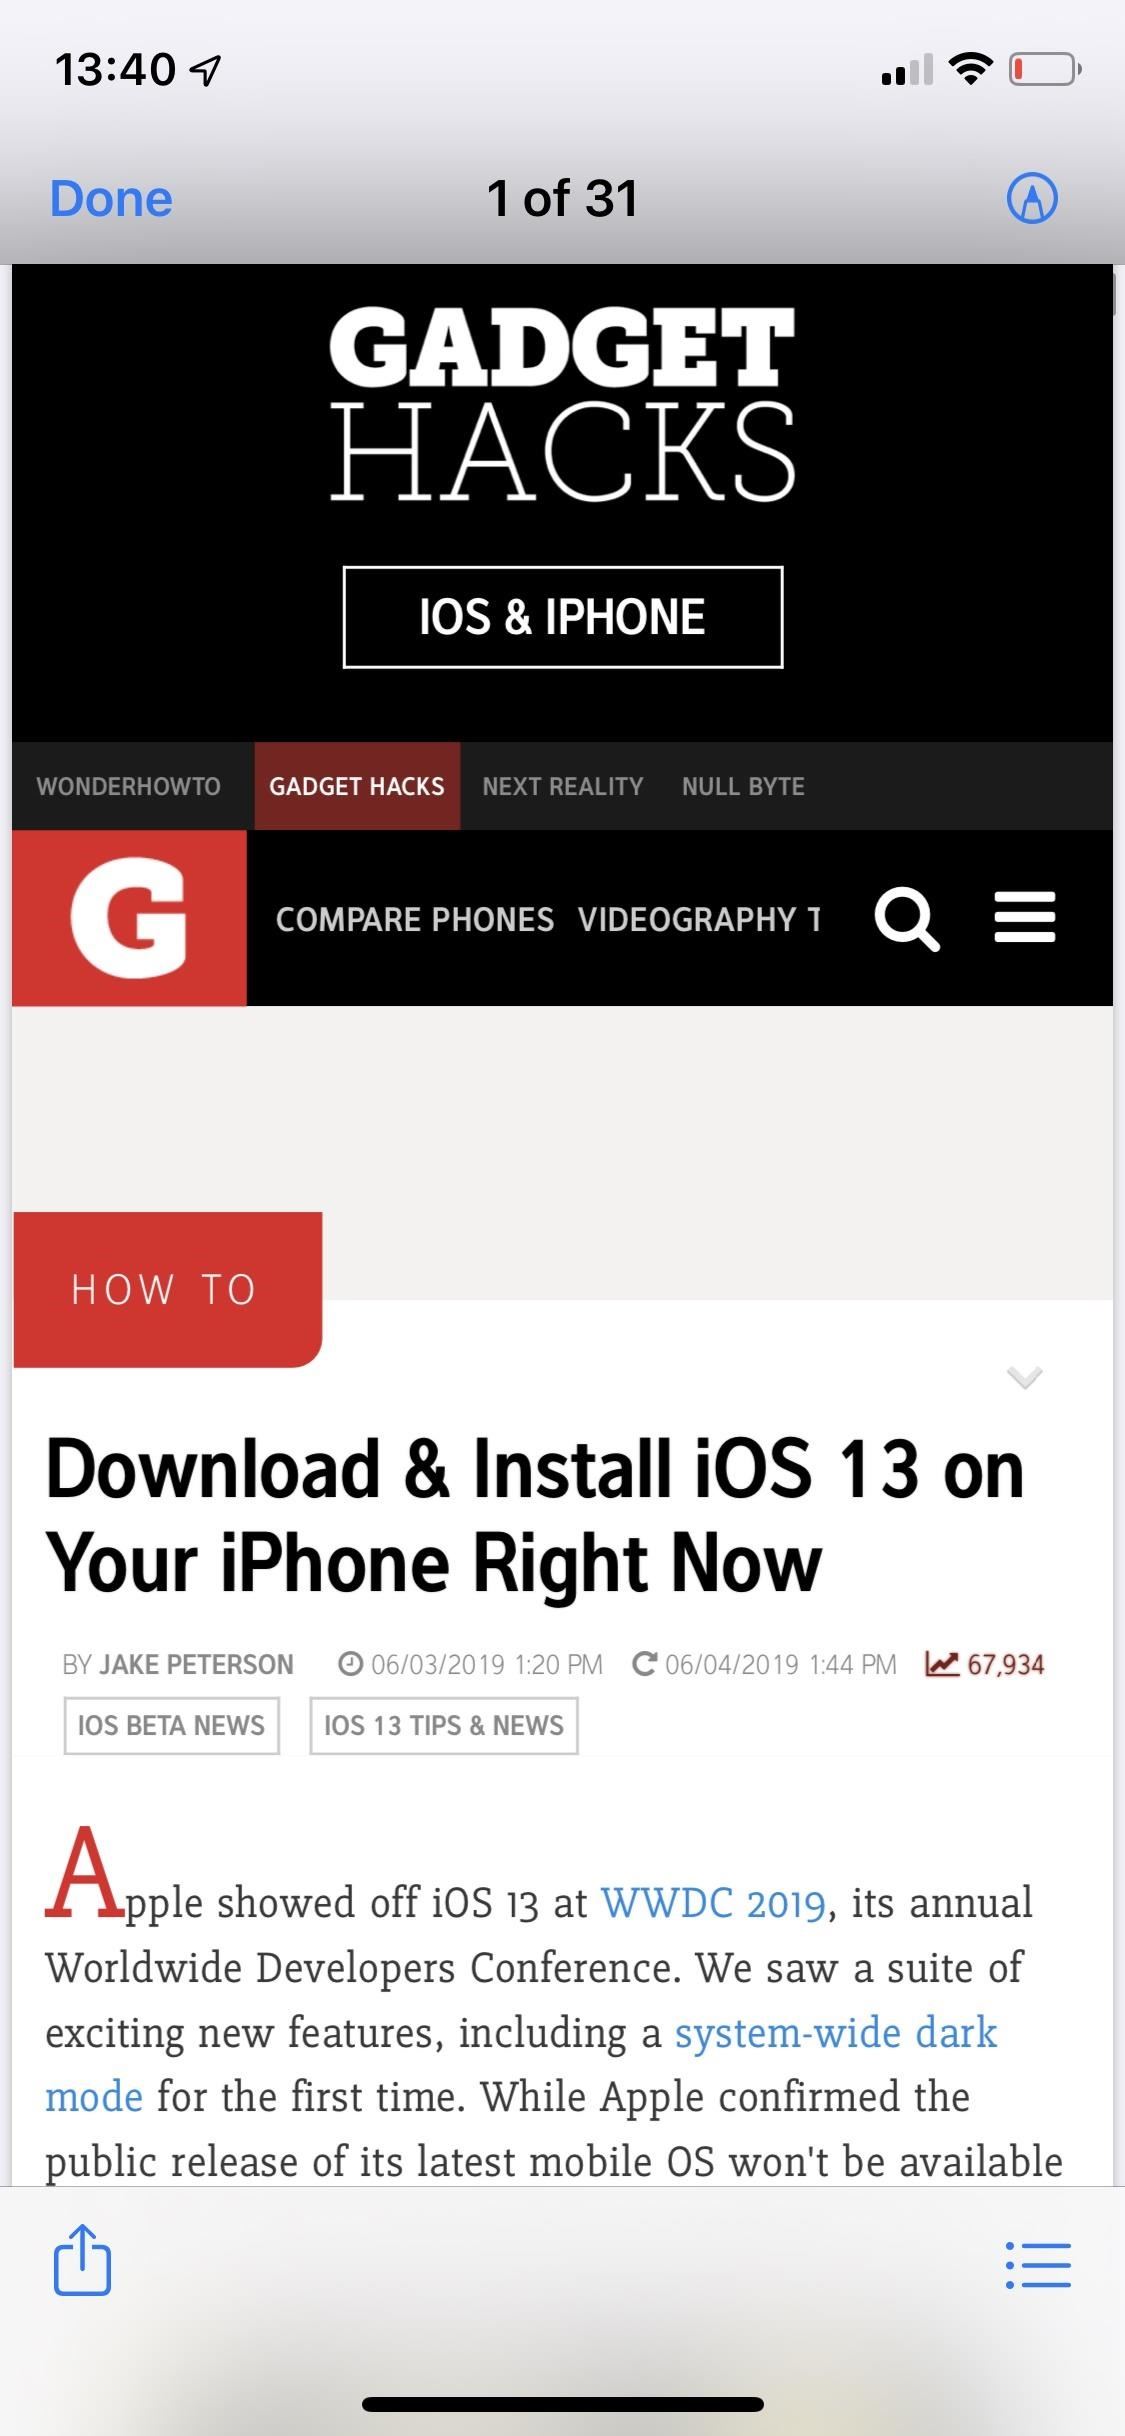 How to Take Scrolling Screenshots of Entire Webpages in iOS 13's Safari for iPhone